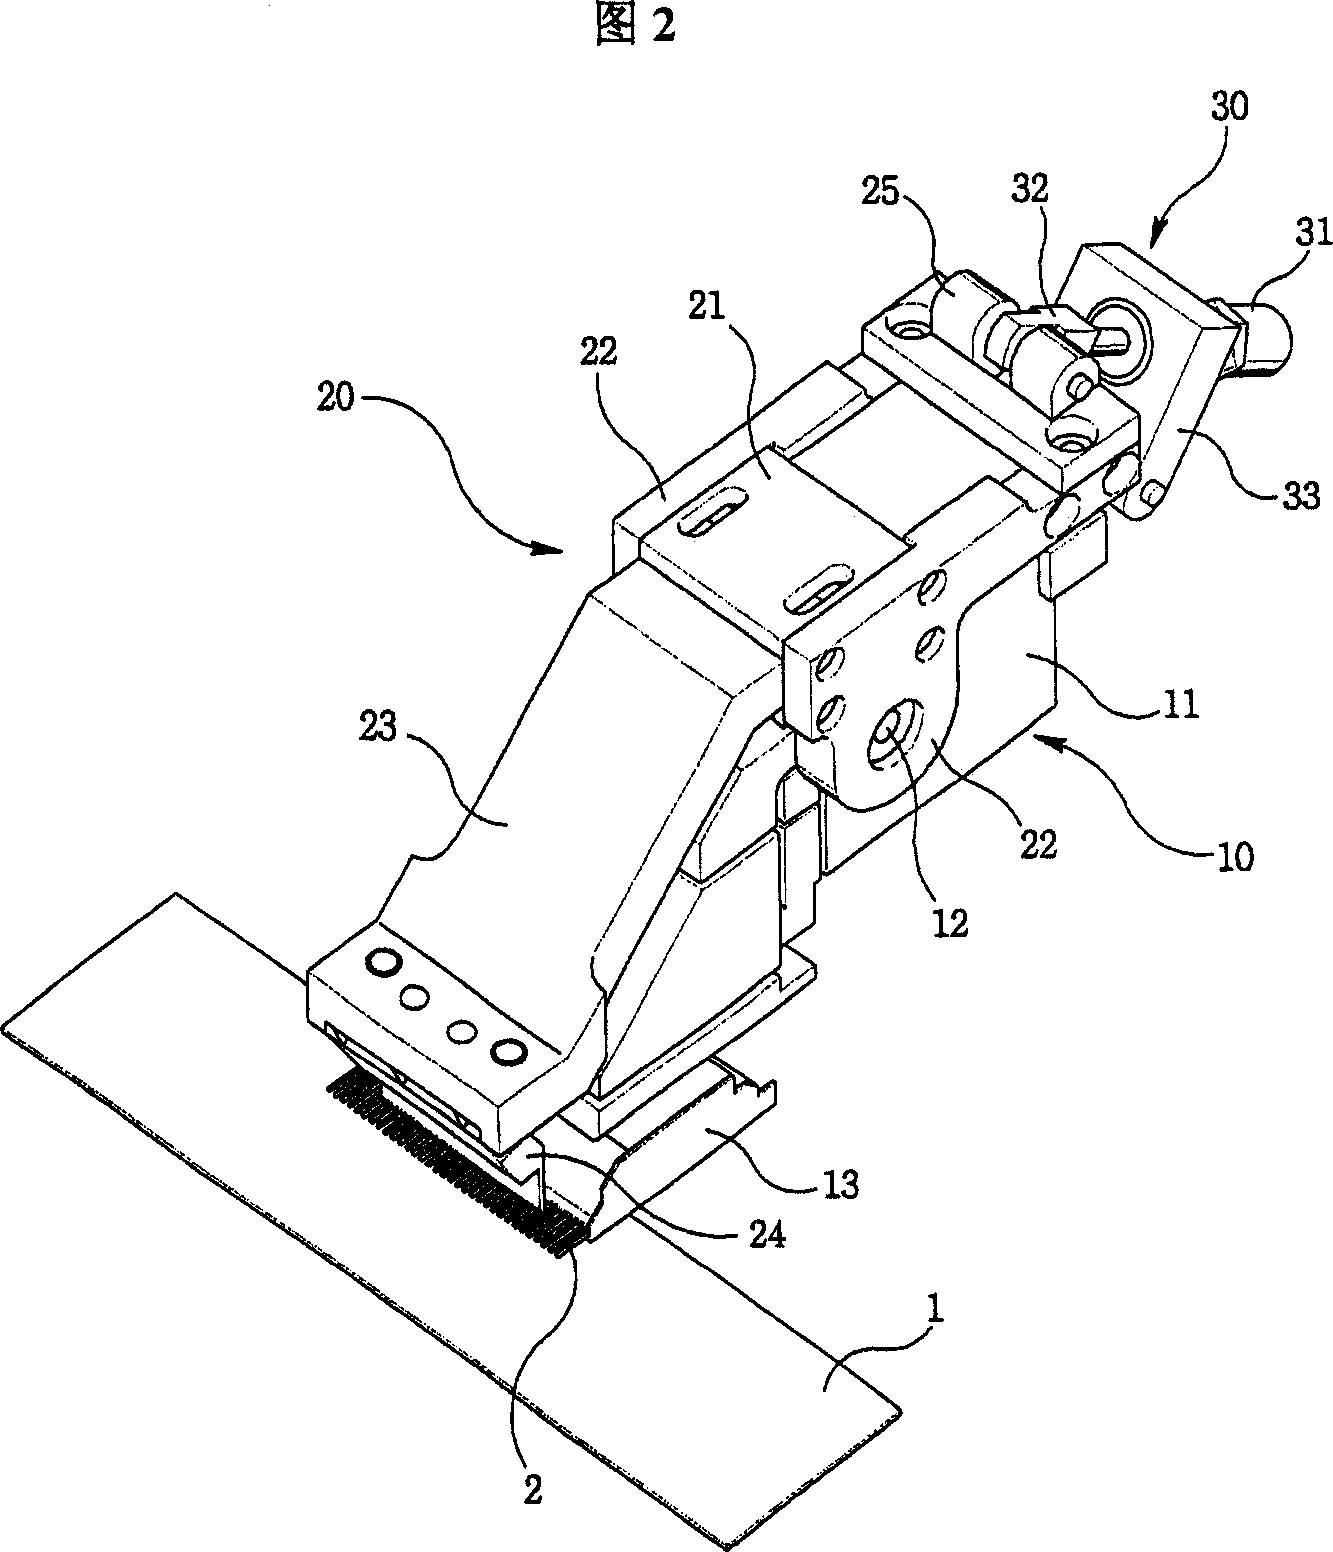 Inspection method and apparatus of flat display pane